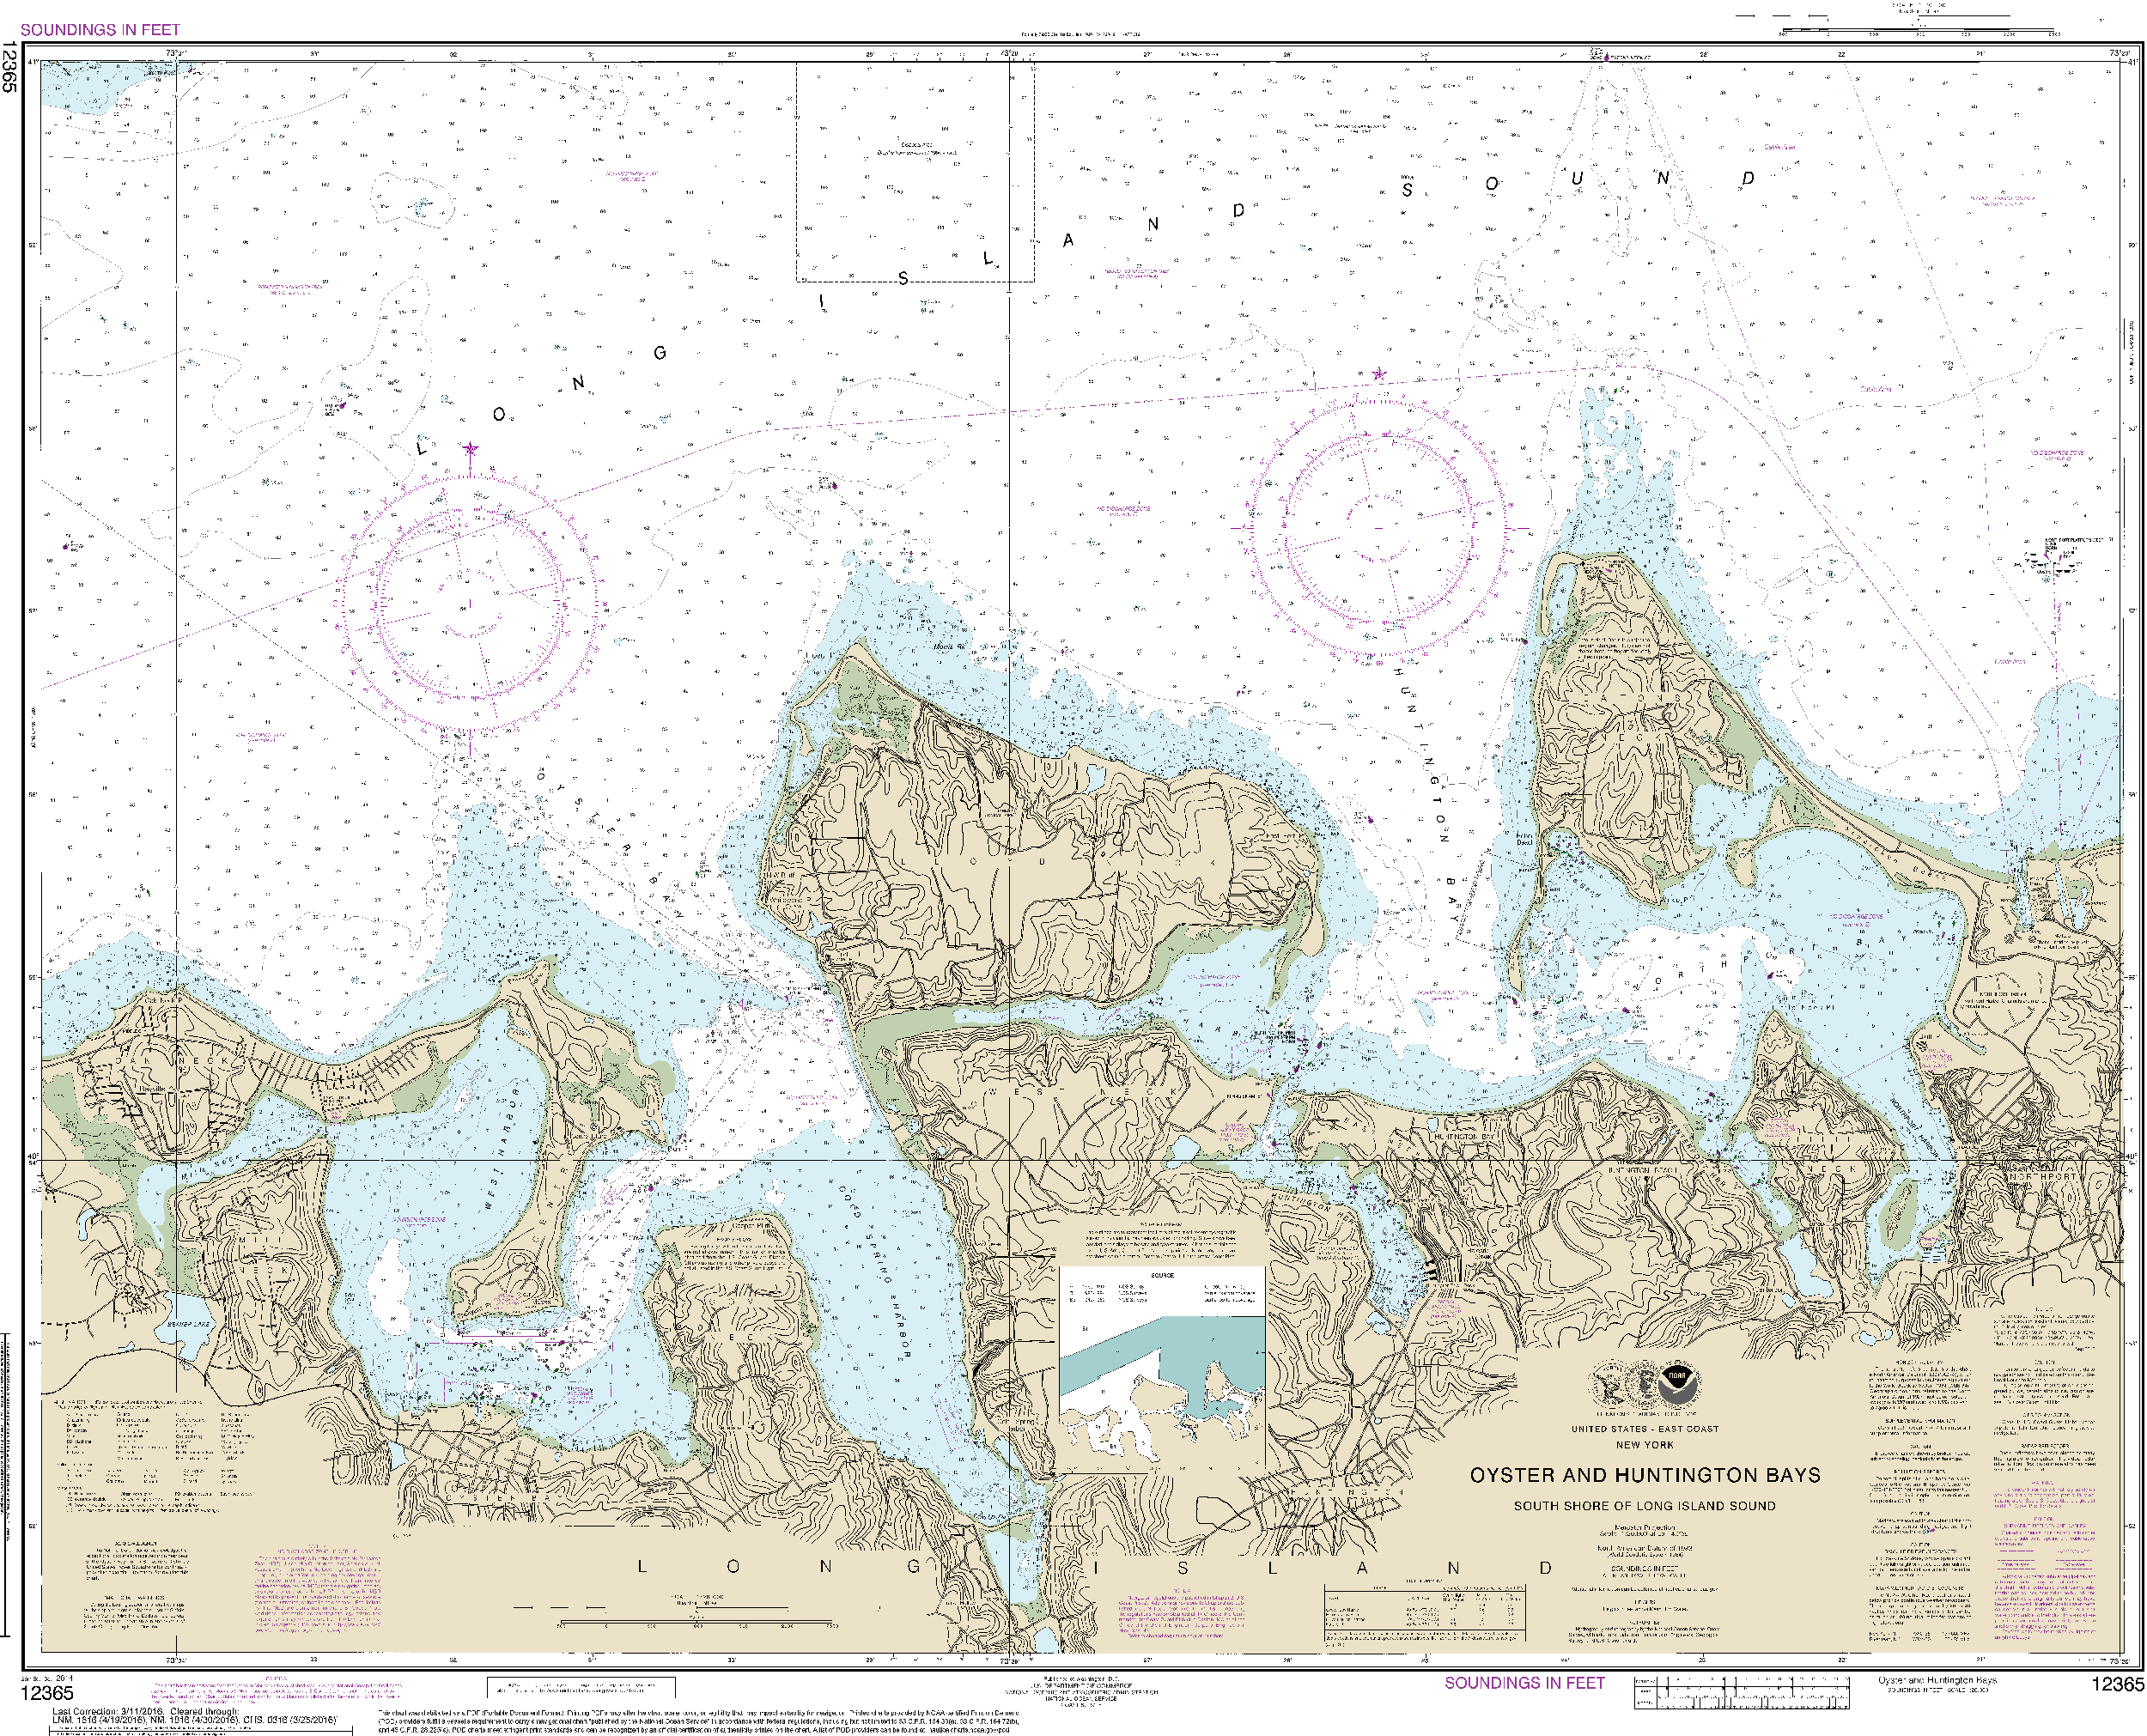 NOAA Nautical Chart 12365: South Shore of Long Island Sound Oyster and Huntington Bays